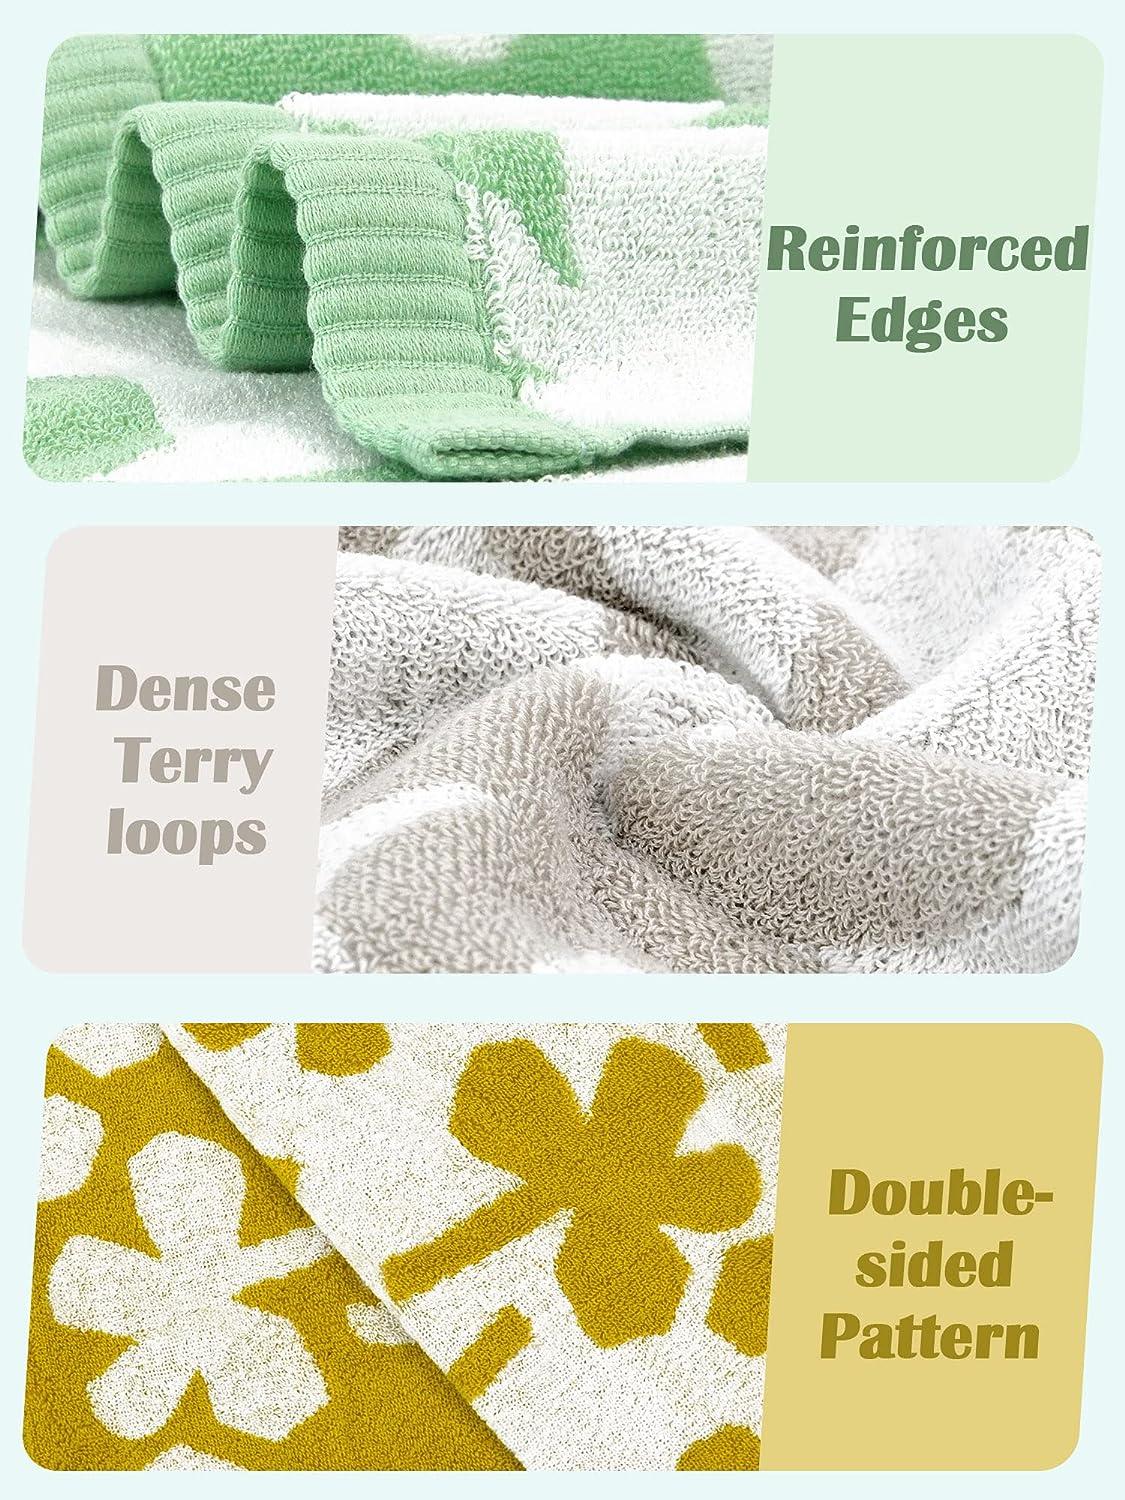 Jacquotha Green Hand Towels for Bathroom Set of 4 - Cute Checkered